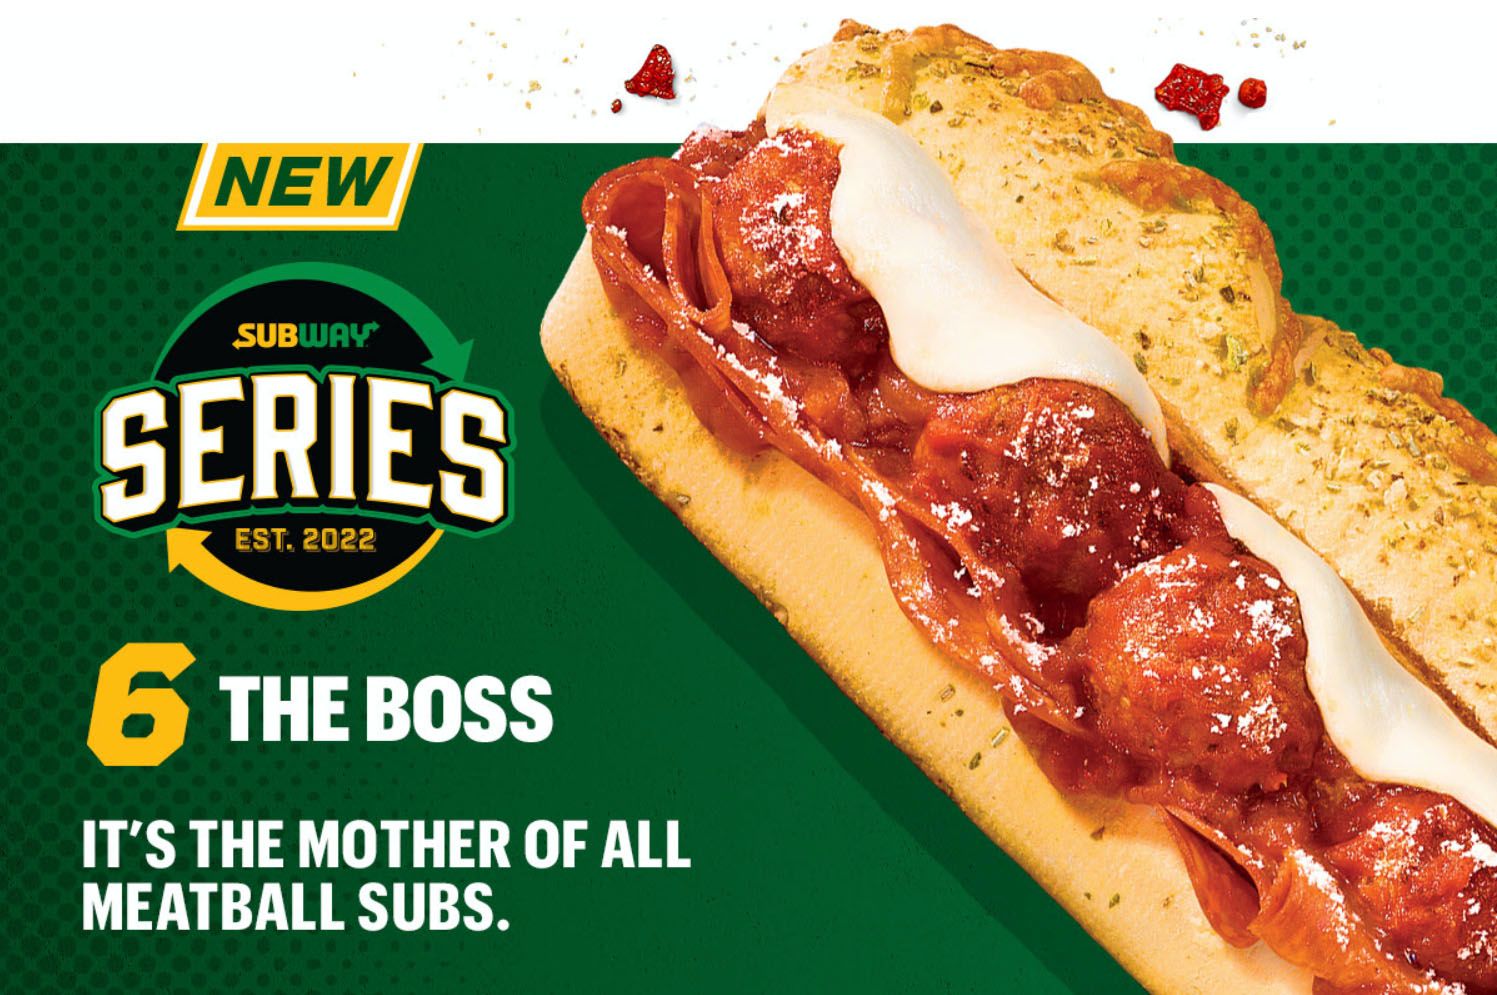 Subway Launches the Boss, a New Meatball Sub, with their Subway Series and Offers a BOGO Deal to Rewards Members